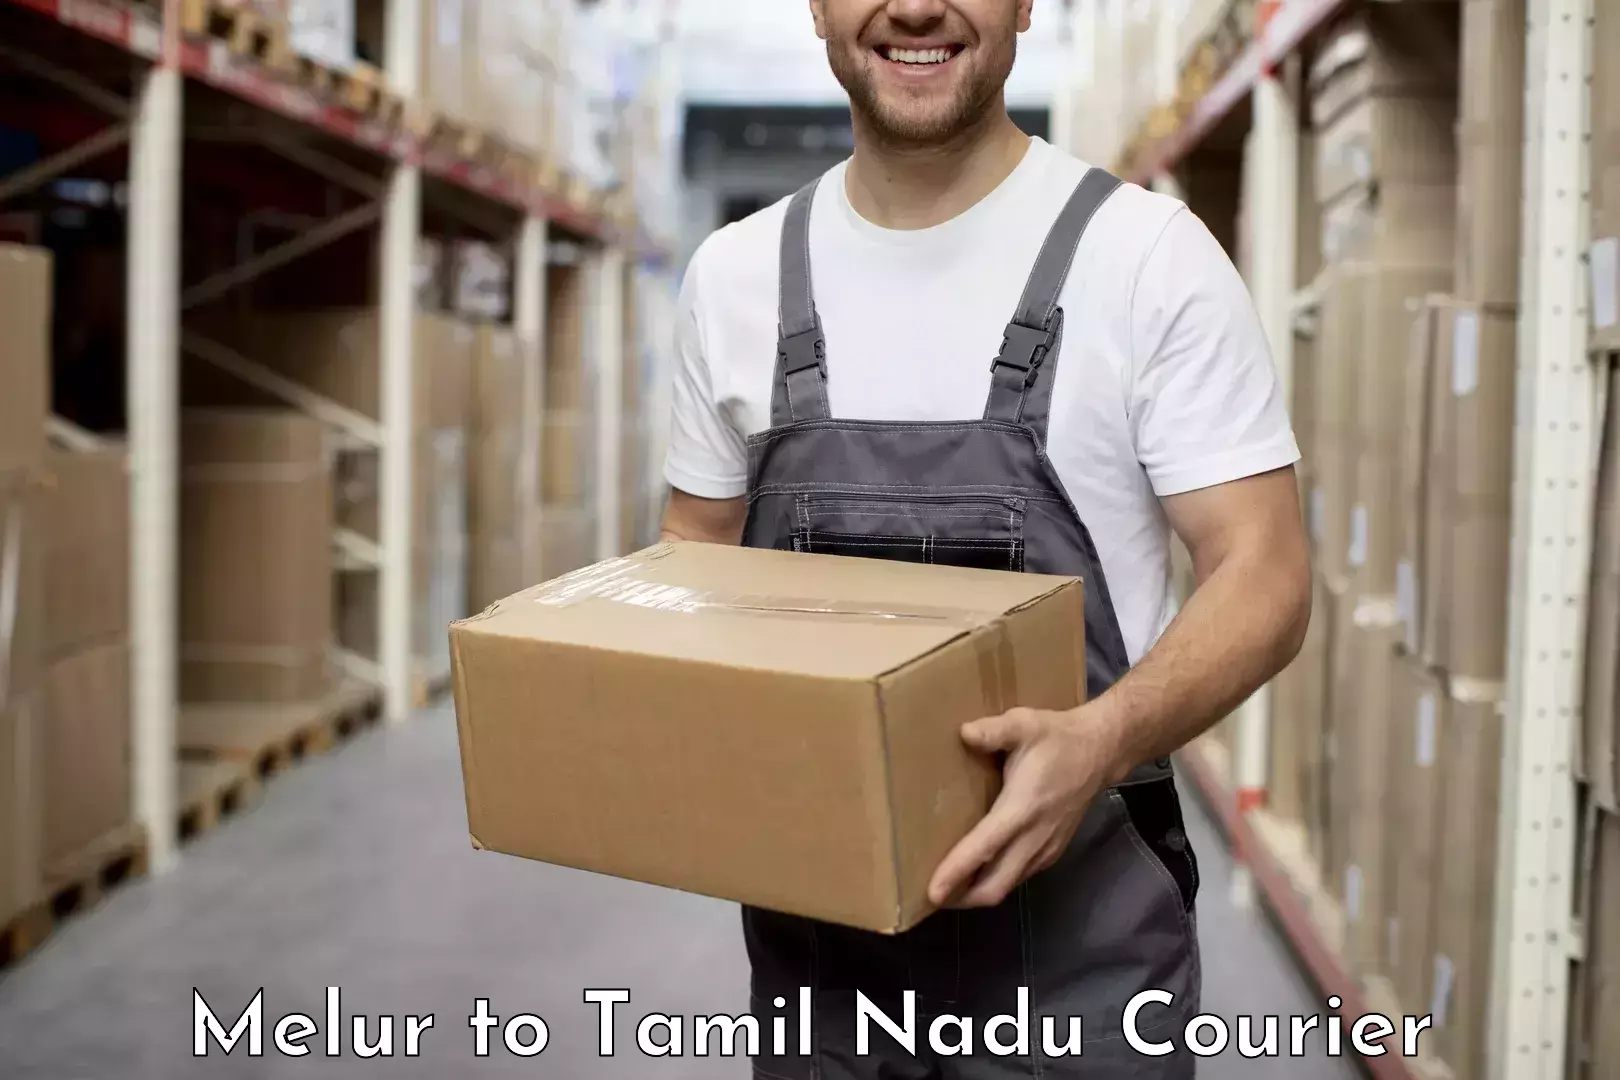 Easy access courier services in Melur to Kodaikanal